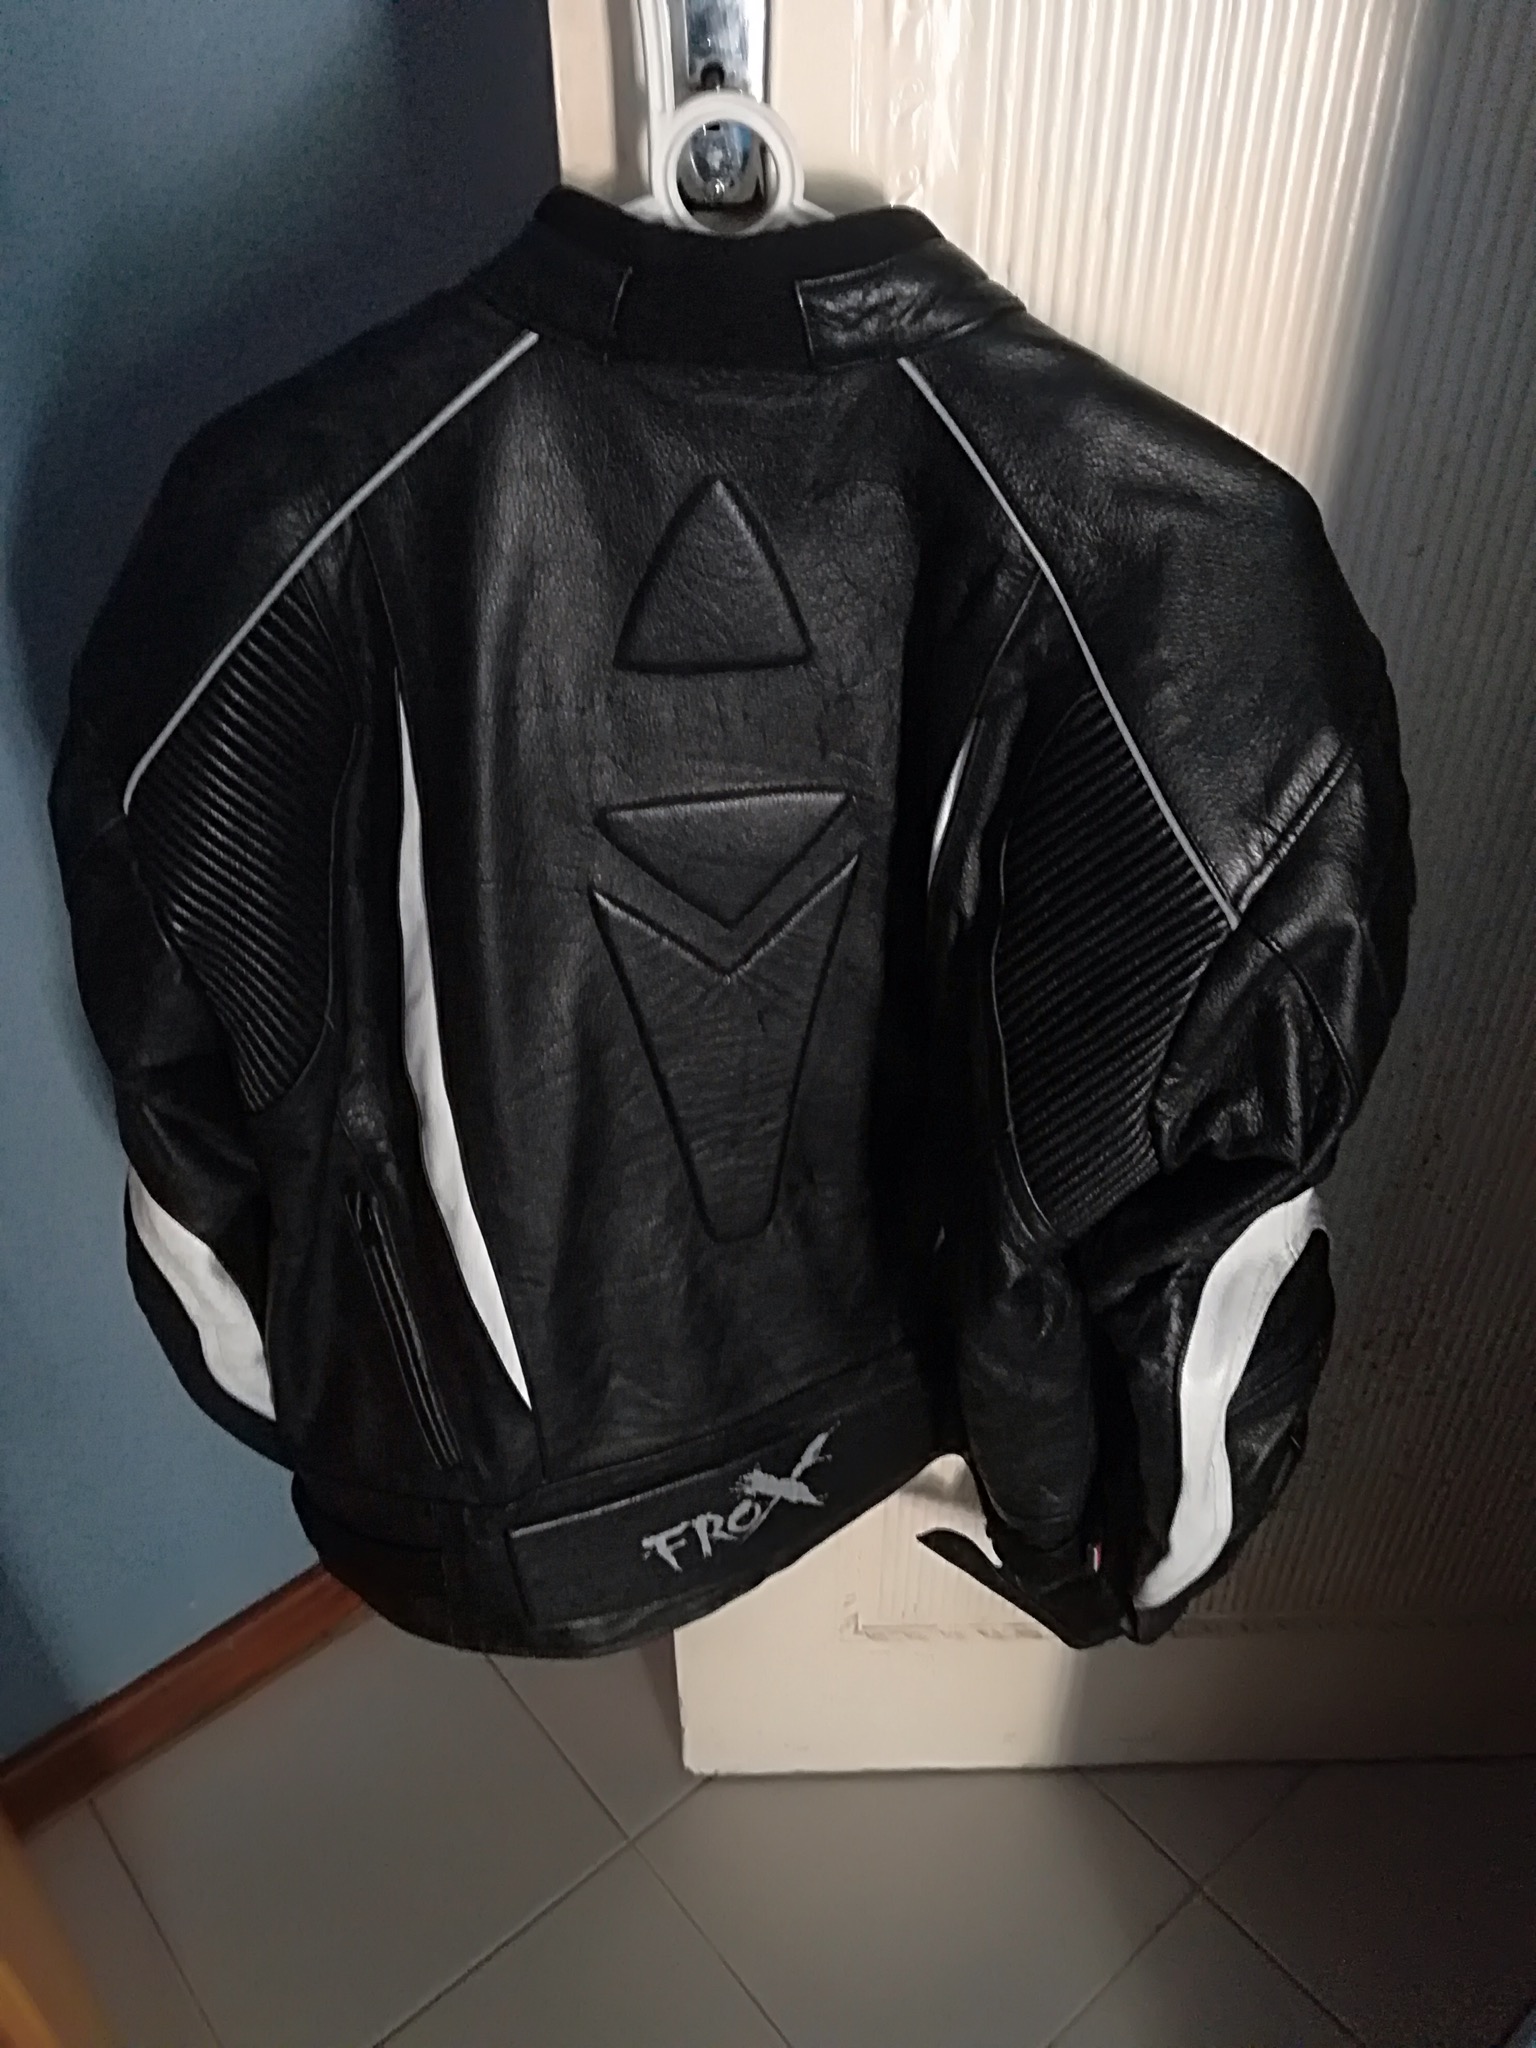 Full leather frox jacket XXL for sale.Used a Few times only,still brand new.